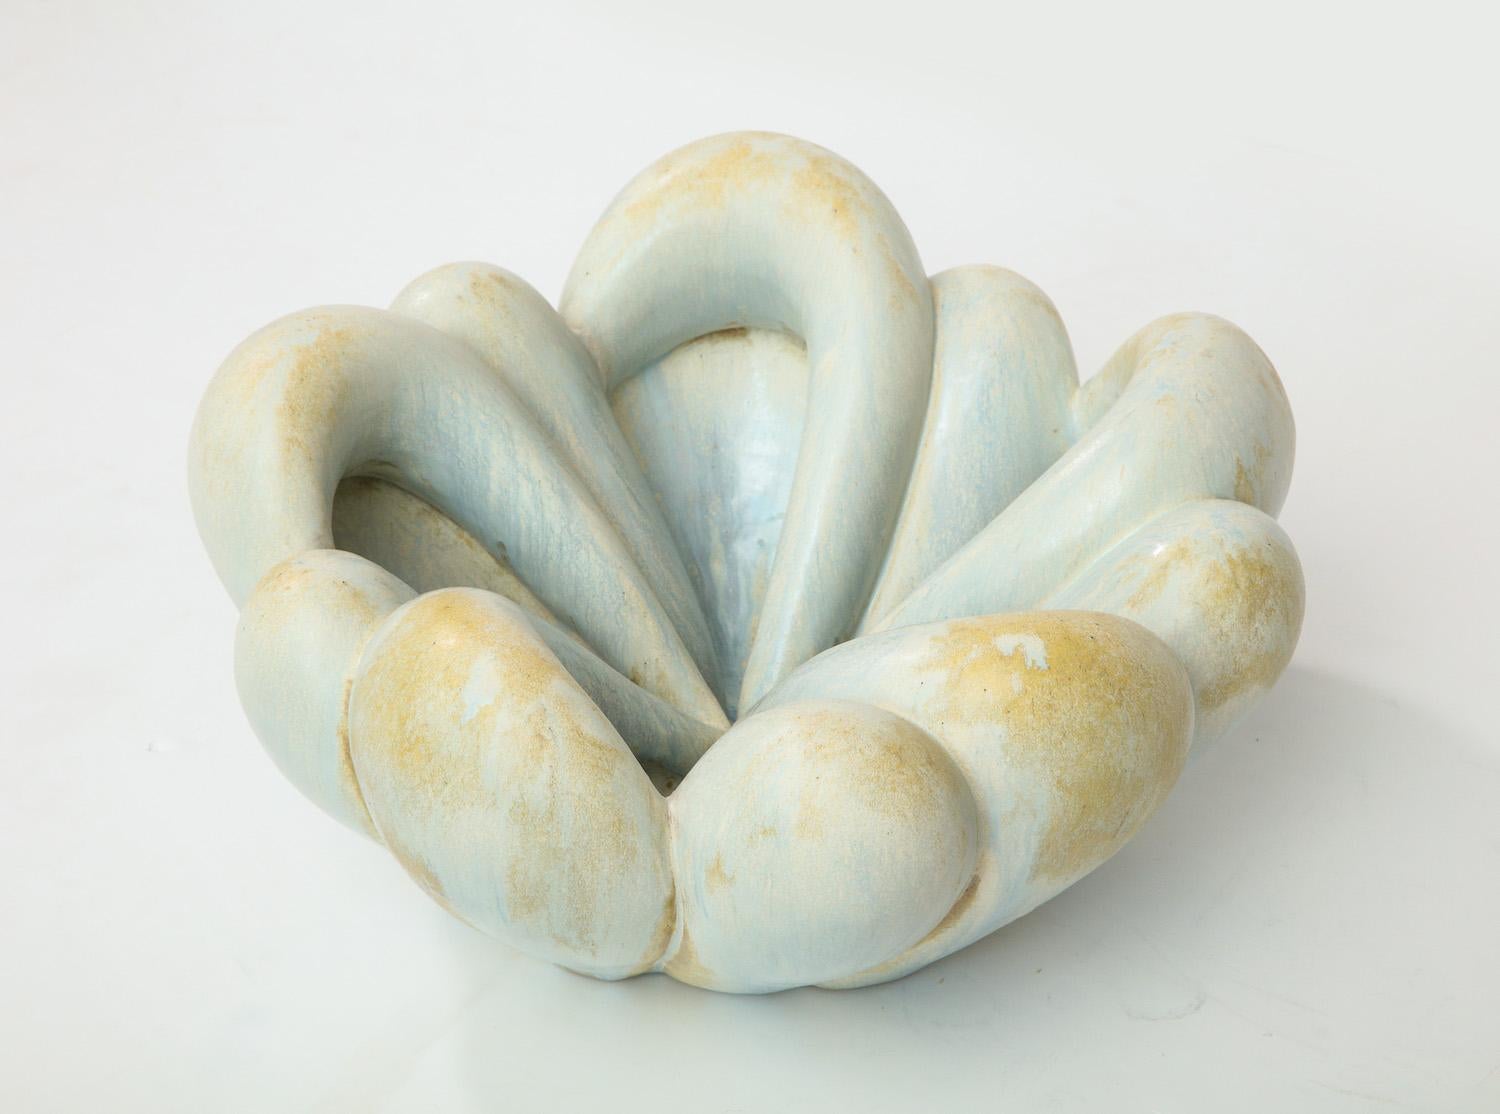 Contemporary Untitled Bowl Sculpture by Rosanne Sniderman